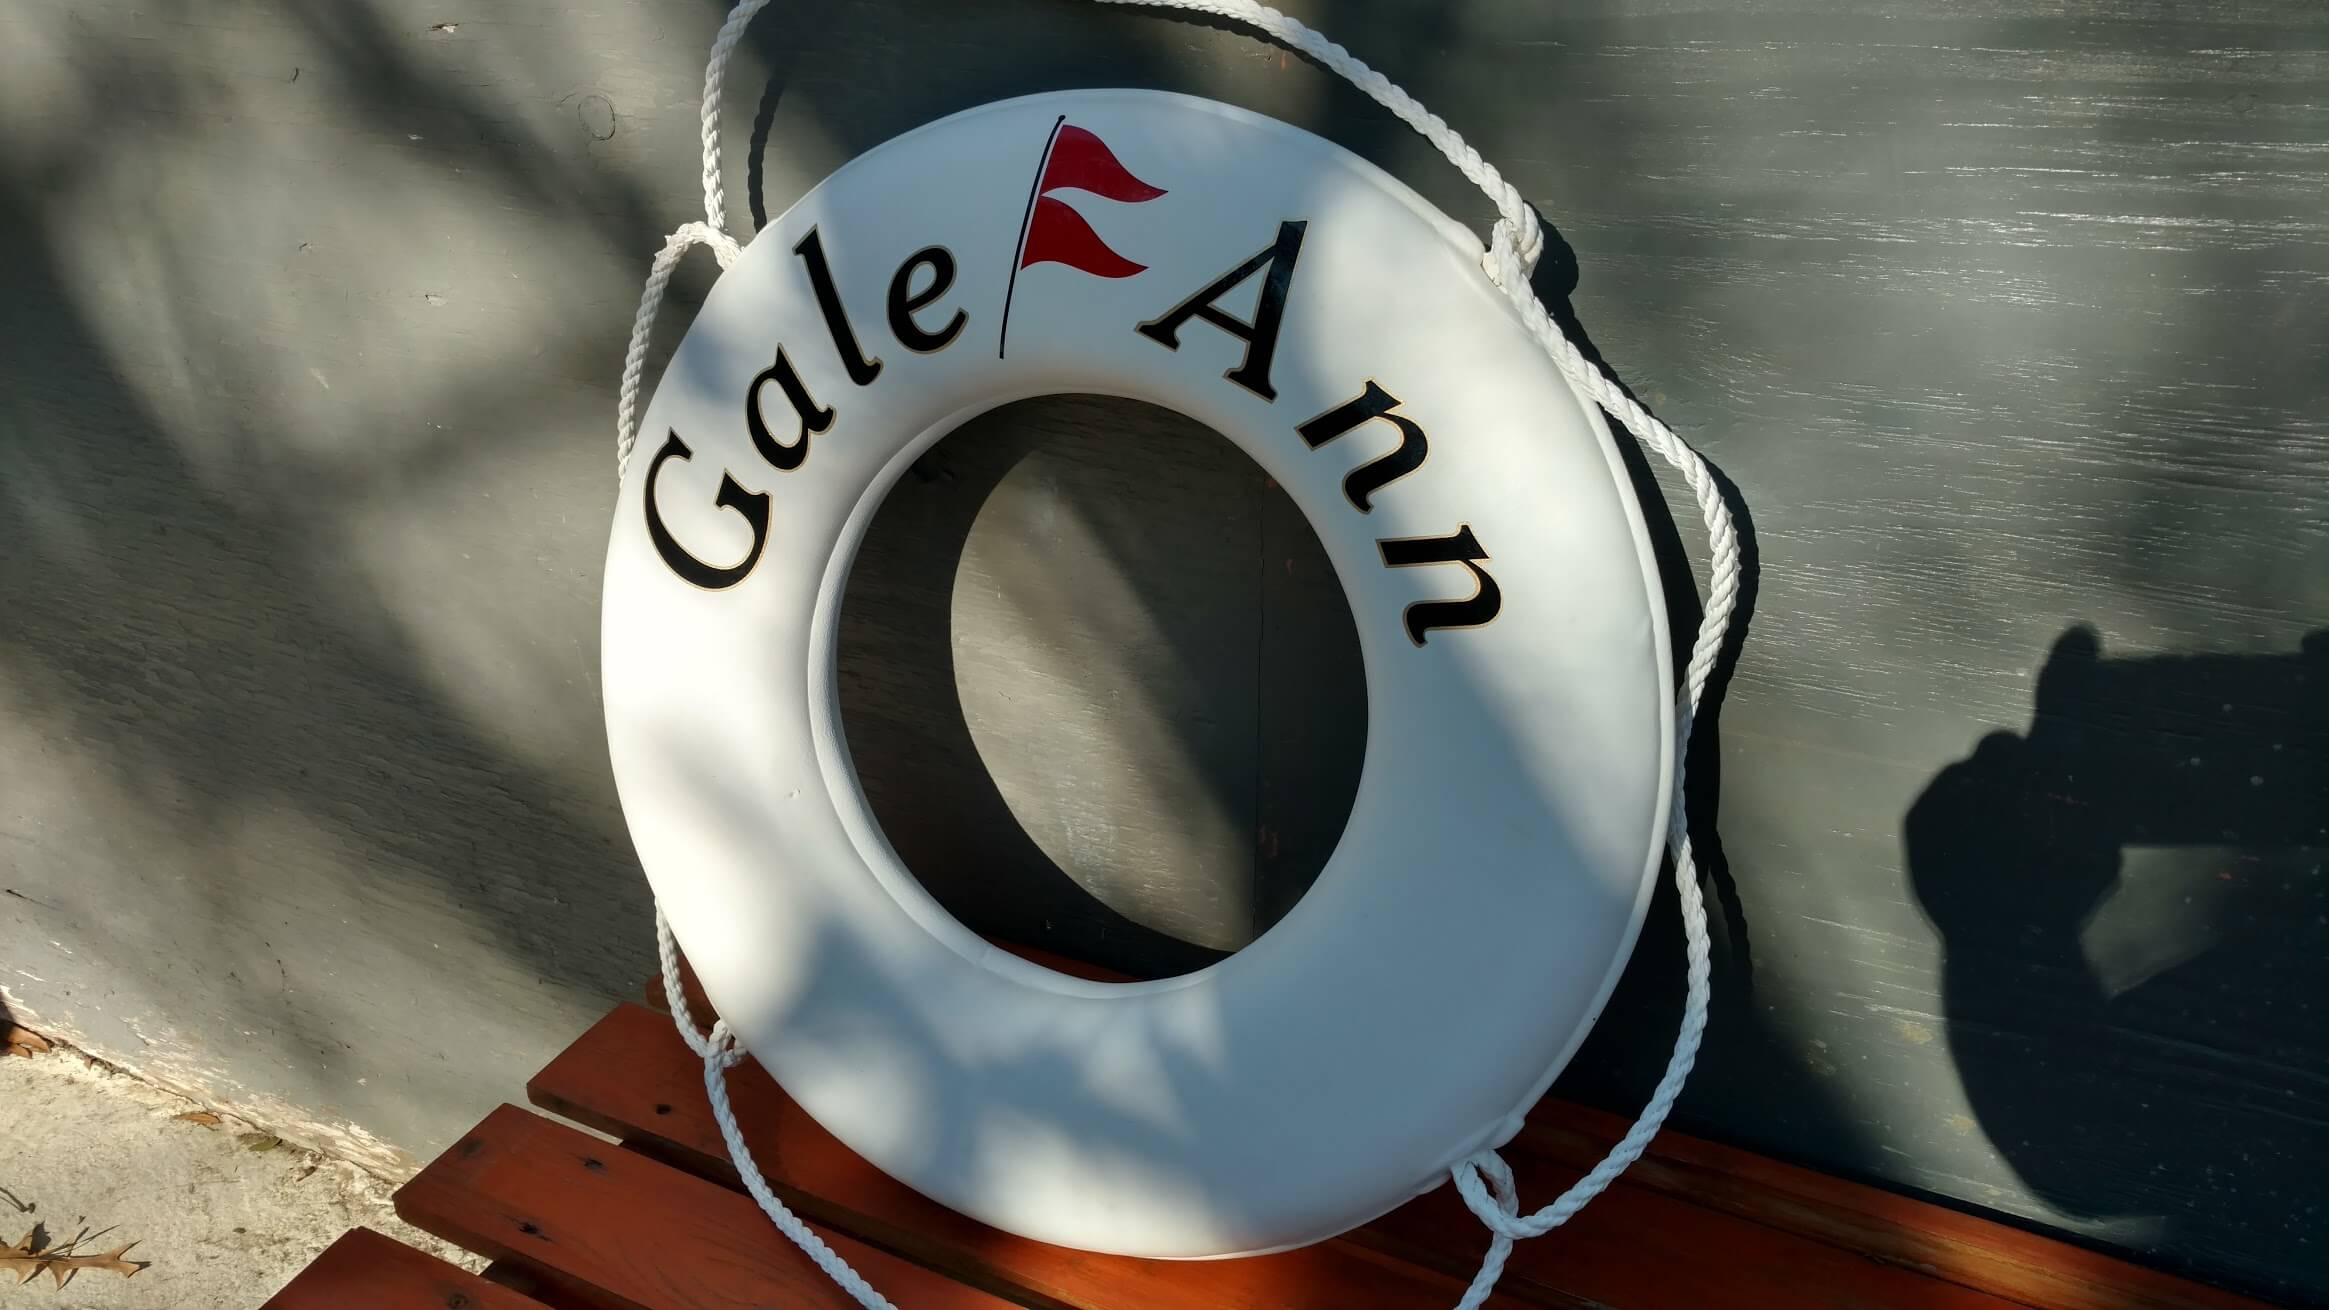 Personalized Ring Buoy with a Red Burgee, for Gale Ann.